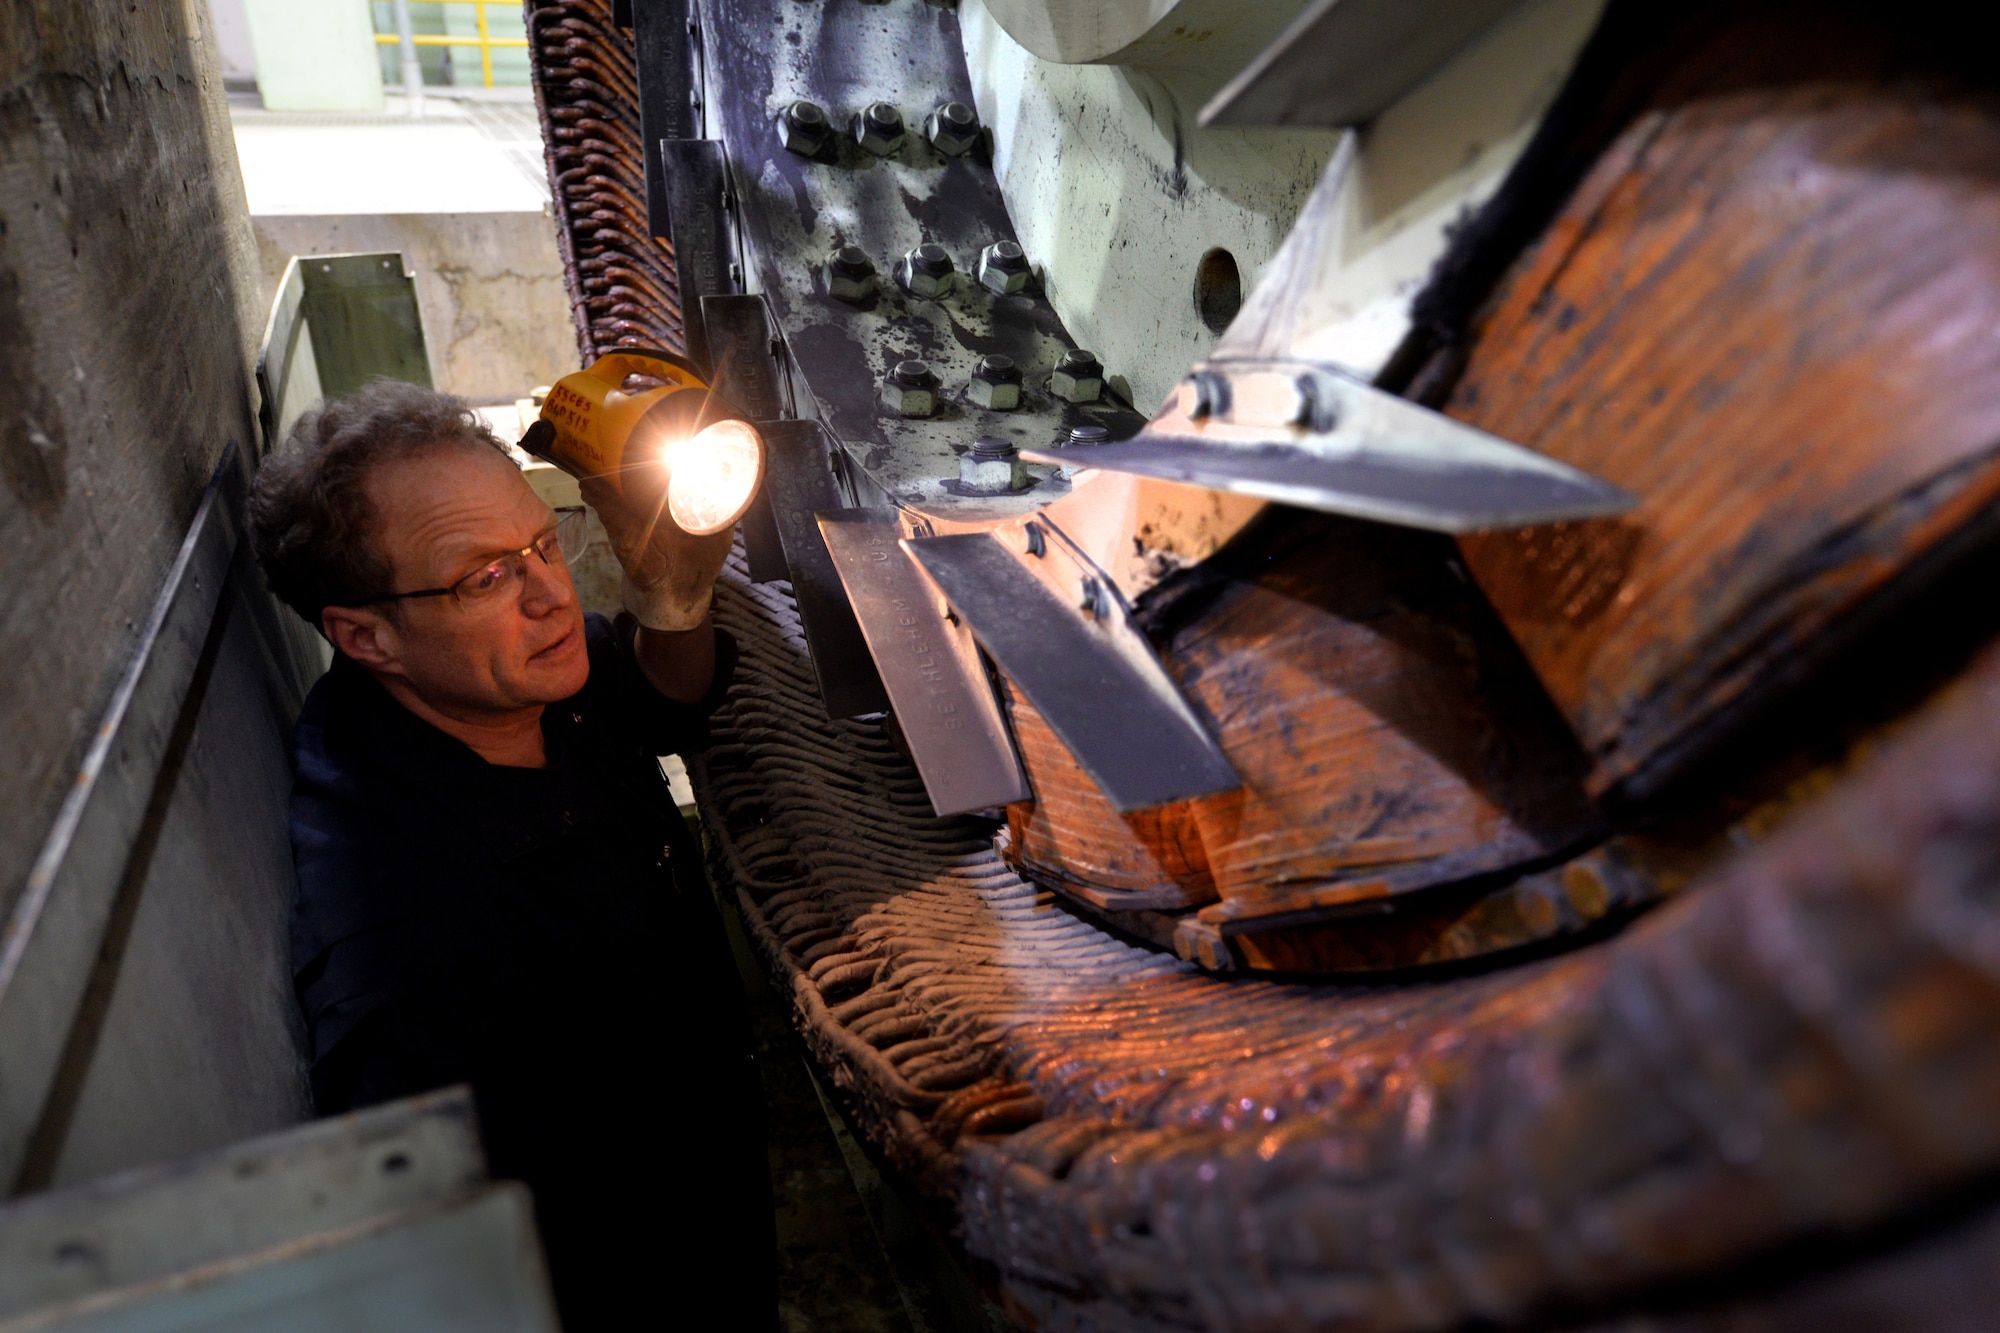 Dave Cormack, 55th Civil Engineer Squadron power support systems mechanic, inspects an alternator for flood damage on Offutt Air Force Base, Nebraska, March 28, 2019. The generators were partially submerged in flood waters following an inordinate amount of snowfall, in the midwest, coupled with several other factors resulted in record-flooding of the adjacent Missouri River.  (U.S. Air Force photo by Josh Plueger)